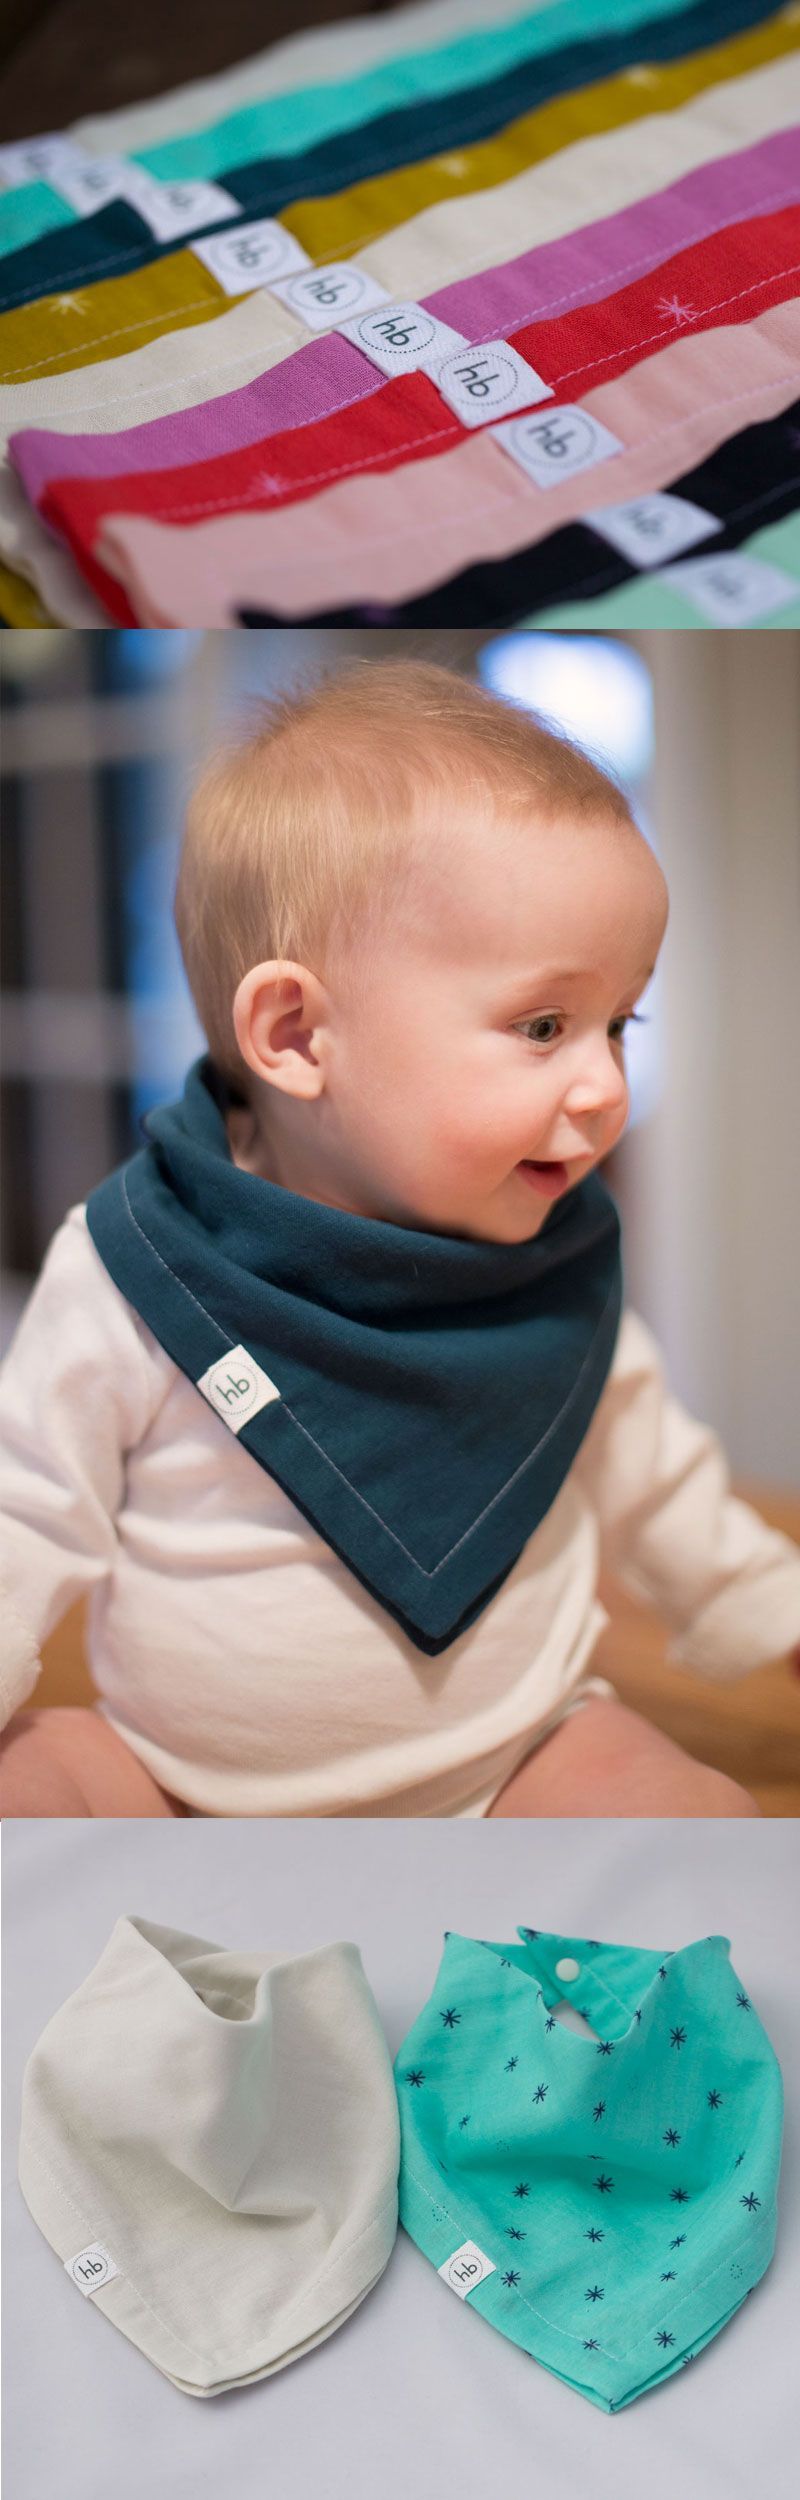 Ollie Bandana Drool Bib | Hemming Birds Boutique Soft, absorbent, stylish.  Gender neutral colors included.  Makes a great unique